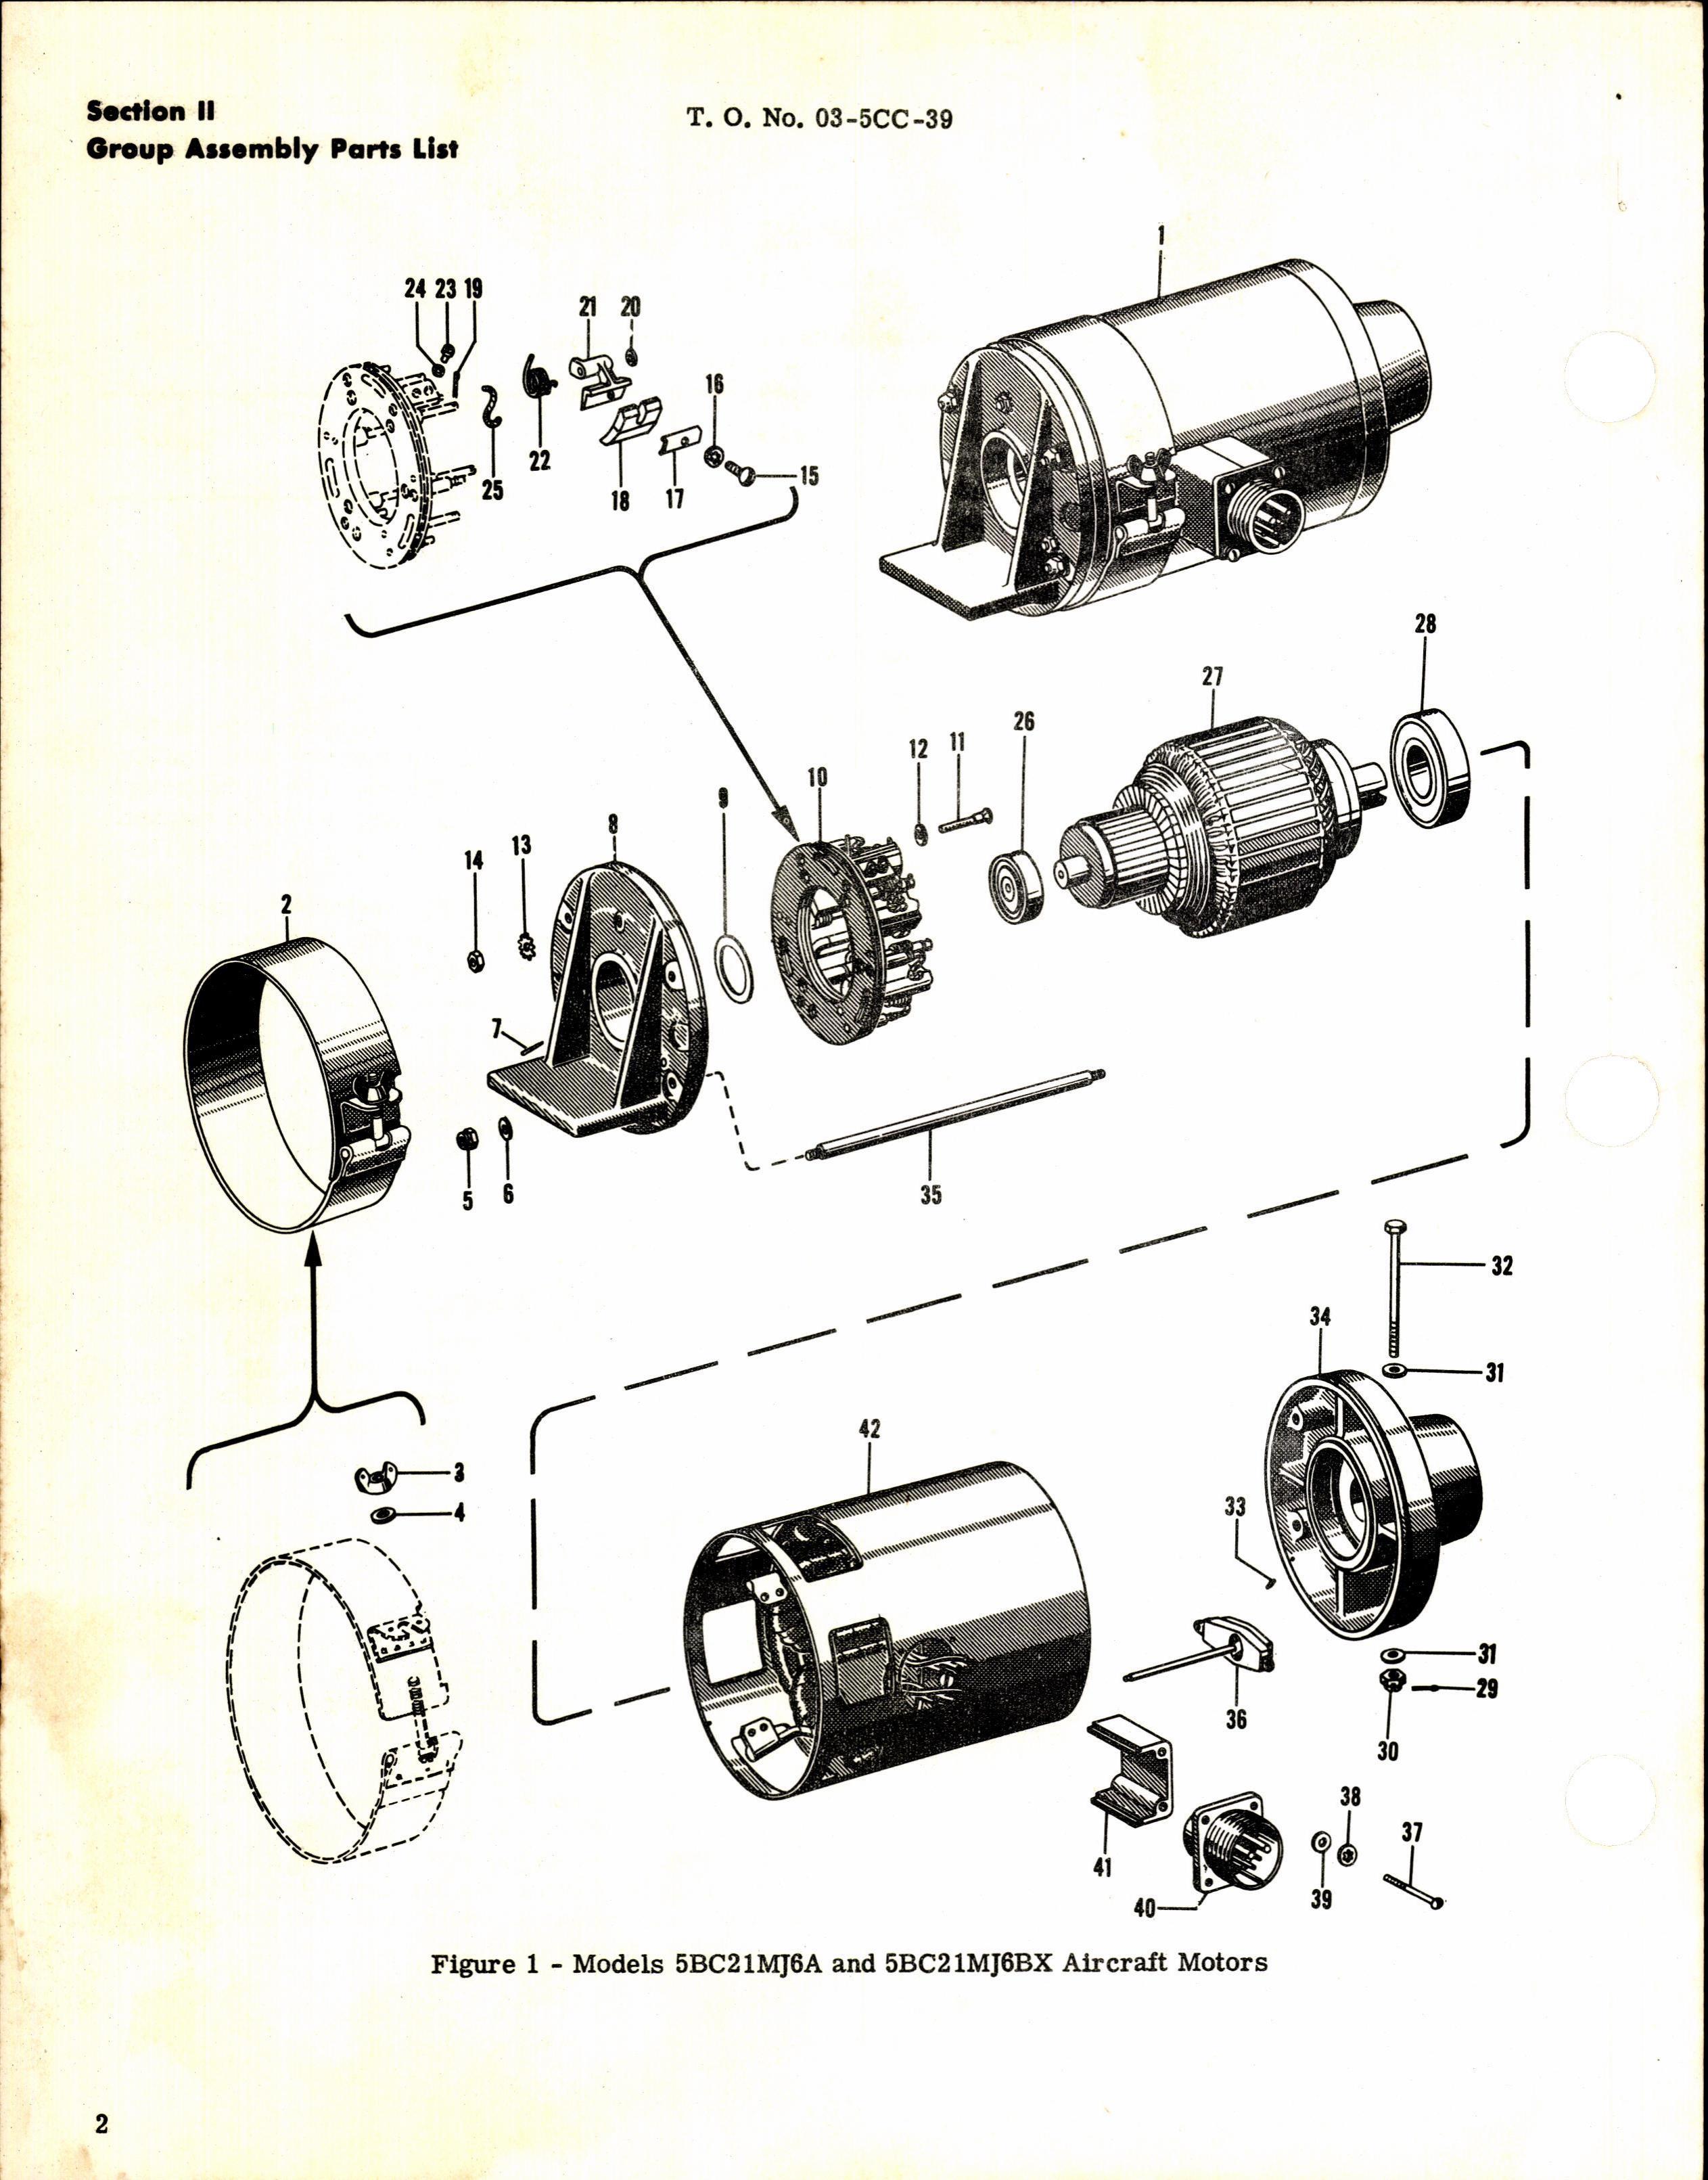 Sample page 4 from AirCorps Library document: Parts Catalog for General Electric Series 5BC21 Aircraft Motor